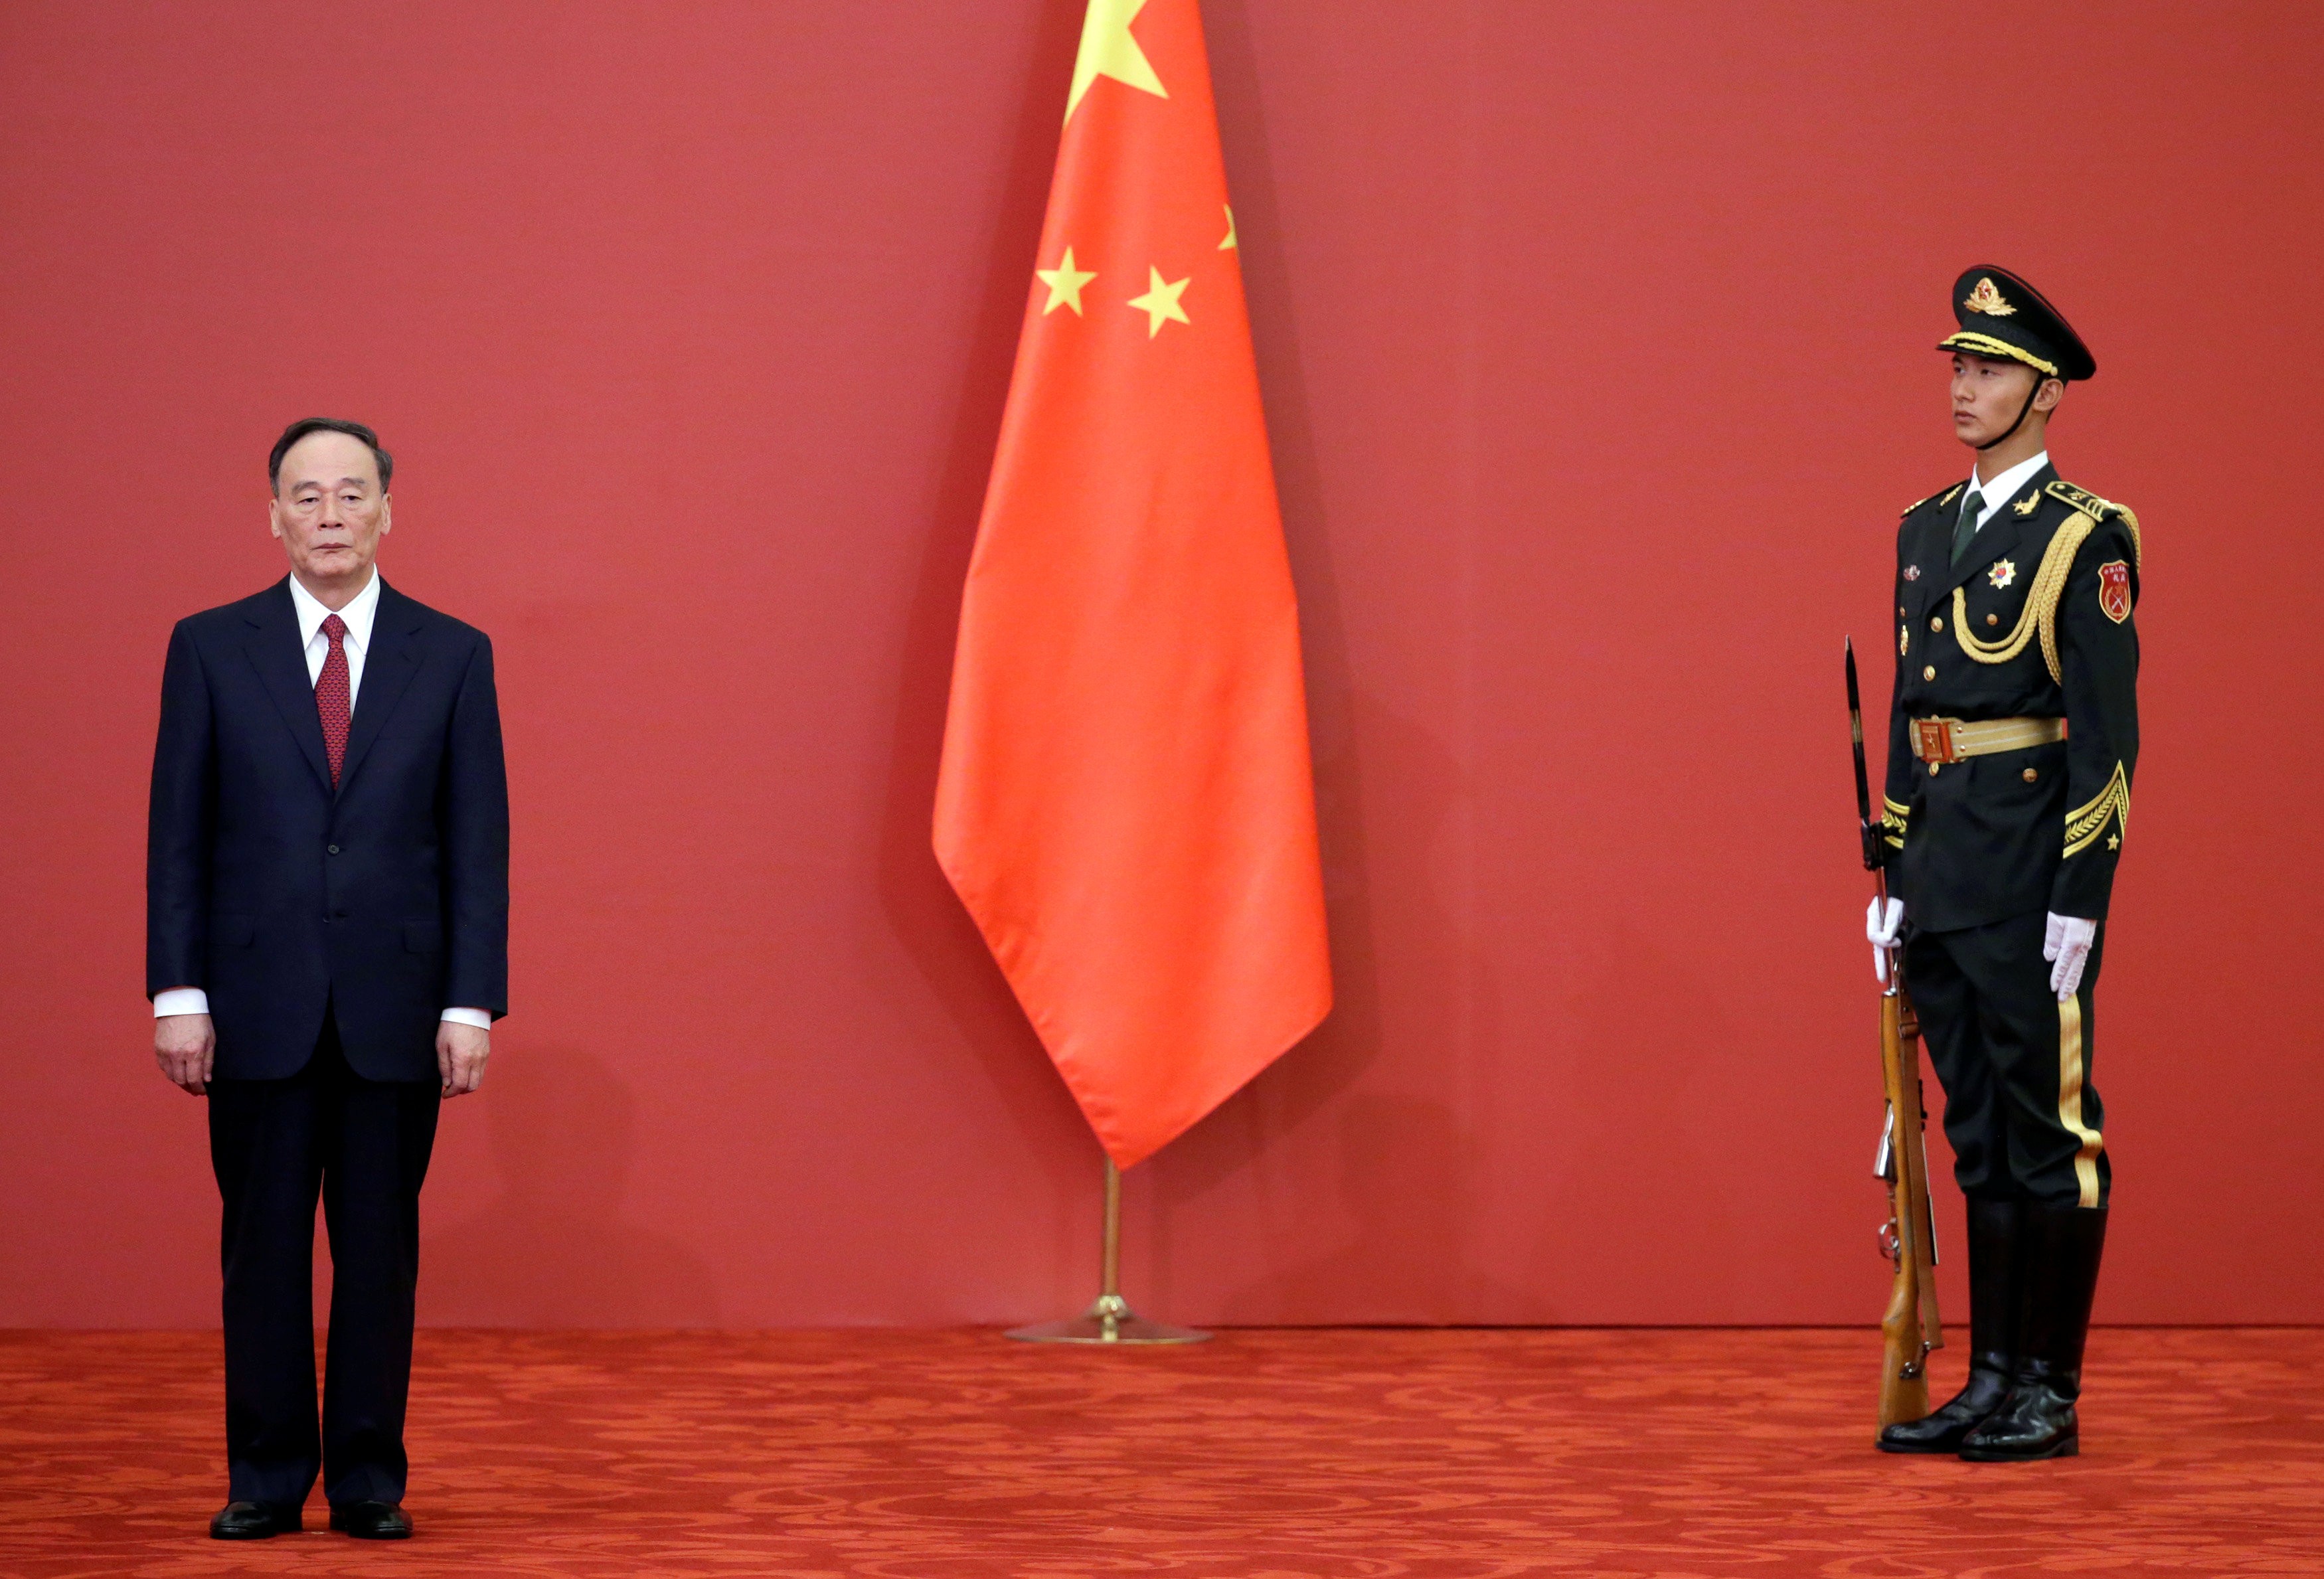 Wang Qishan, the former secretary of the Communist Party’s Central Commission for Discipline Inspection, was the public face of President Xi Jinping’s anti-corruption campaign. Photo: Reuters